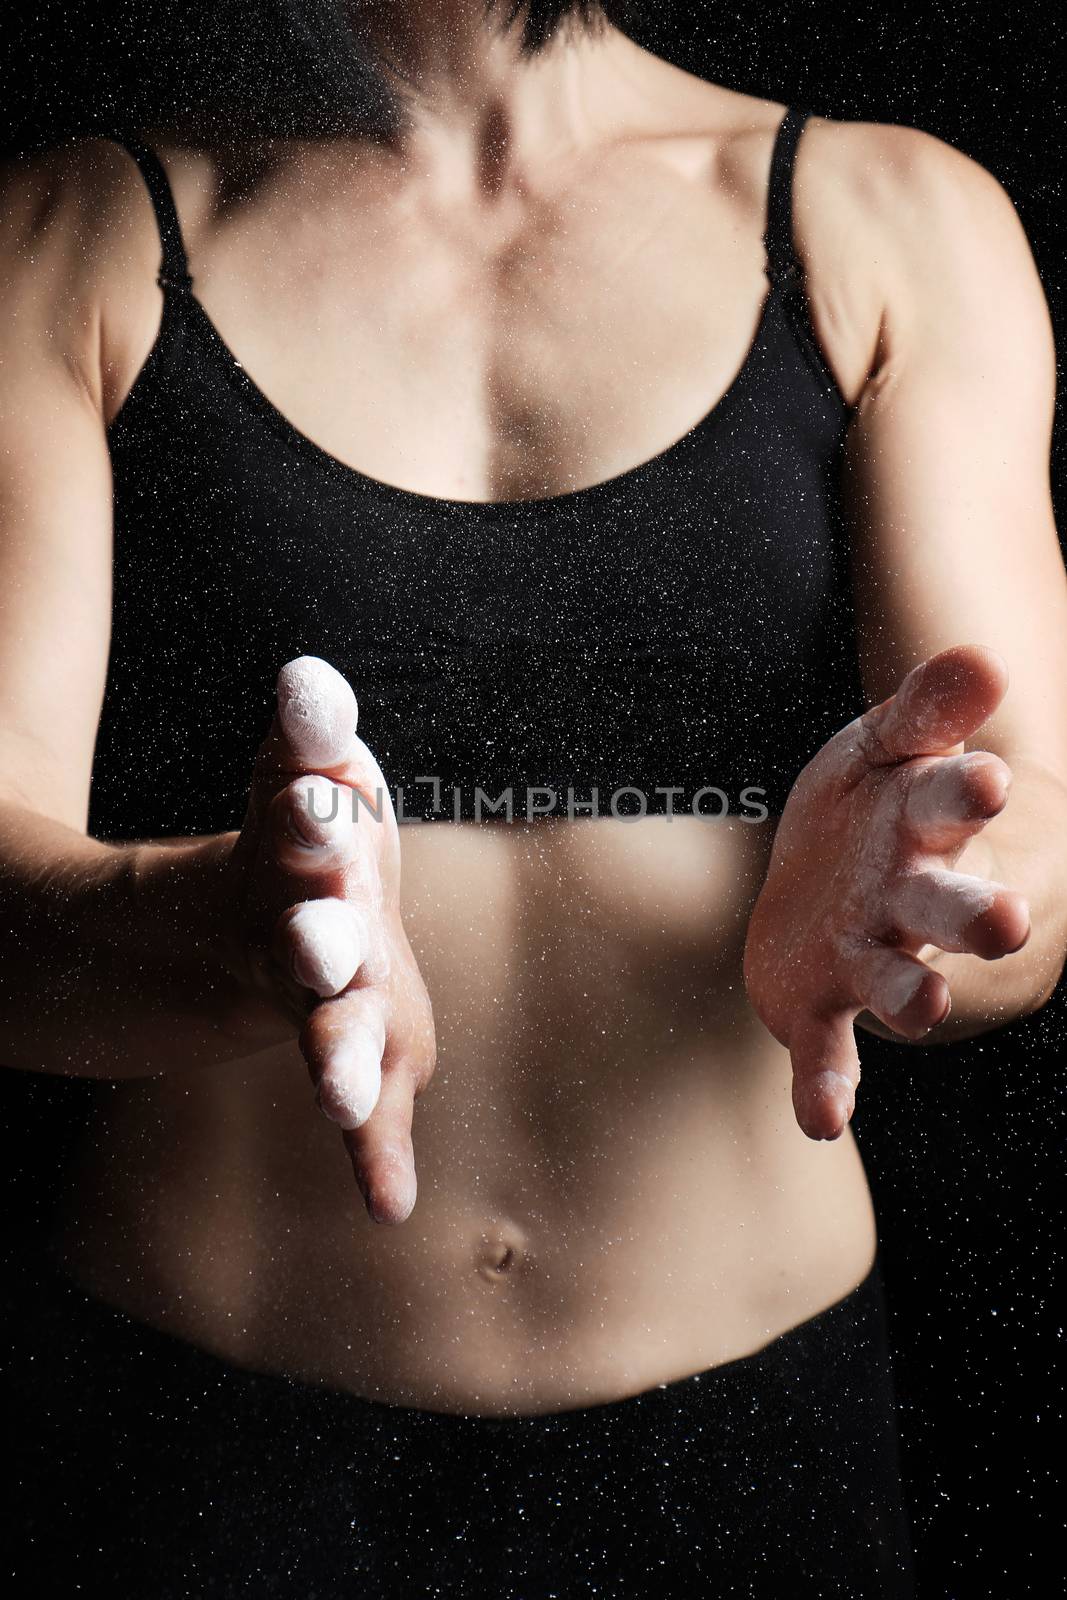 young girl with a sports figure dressed in a black top claps in her hands with white magnesia, preparing before exercise, low key